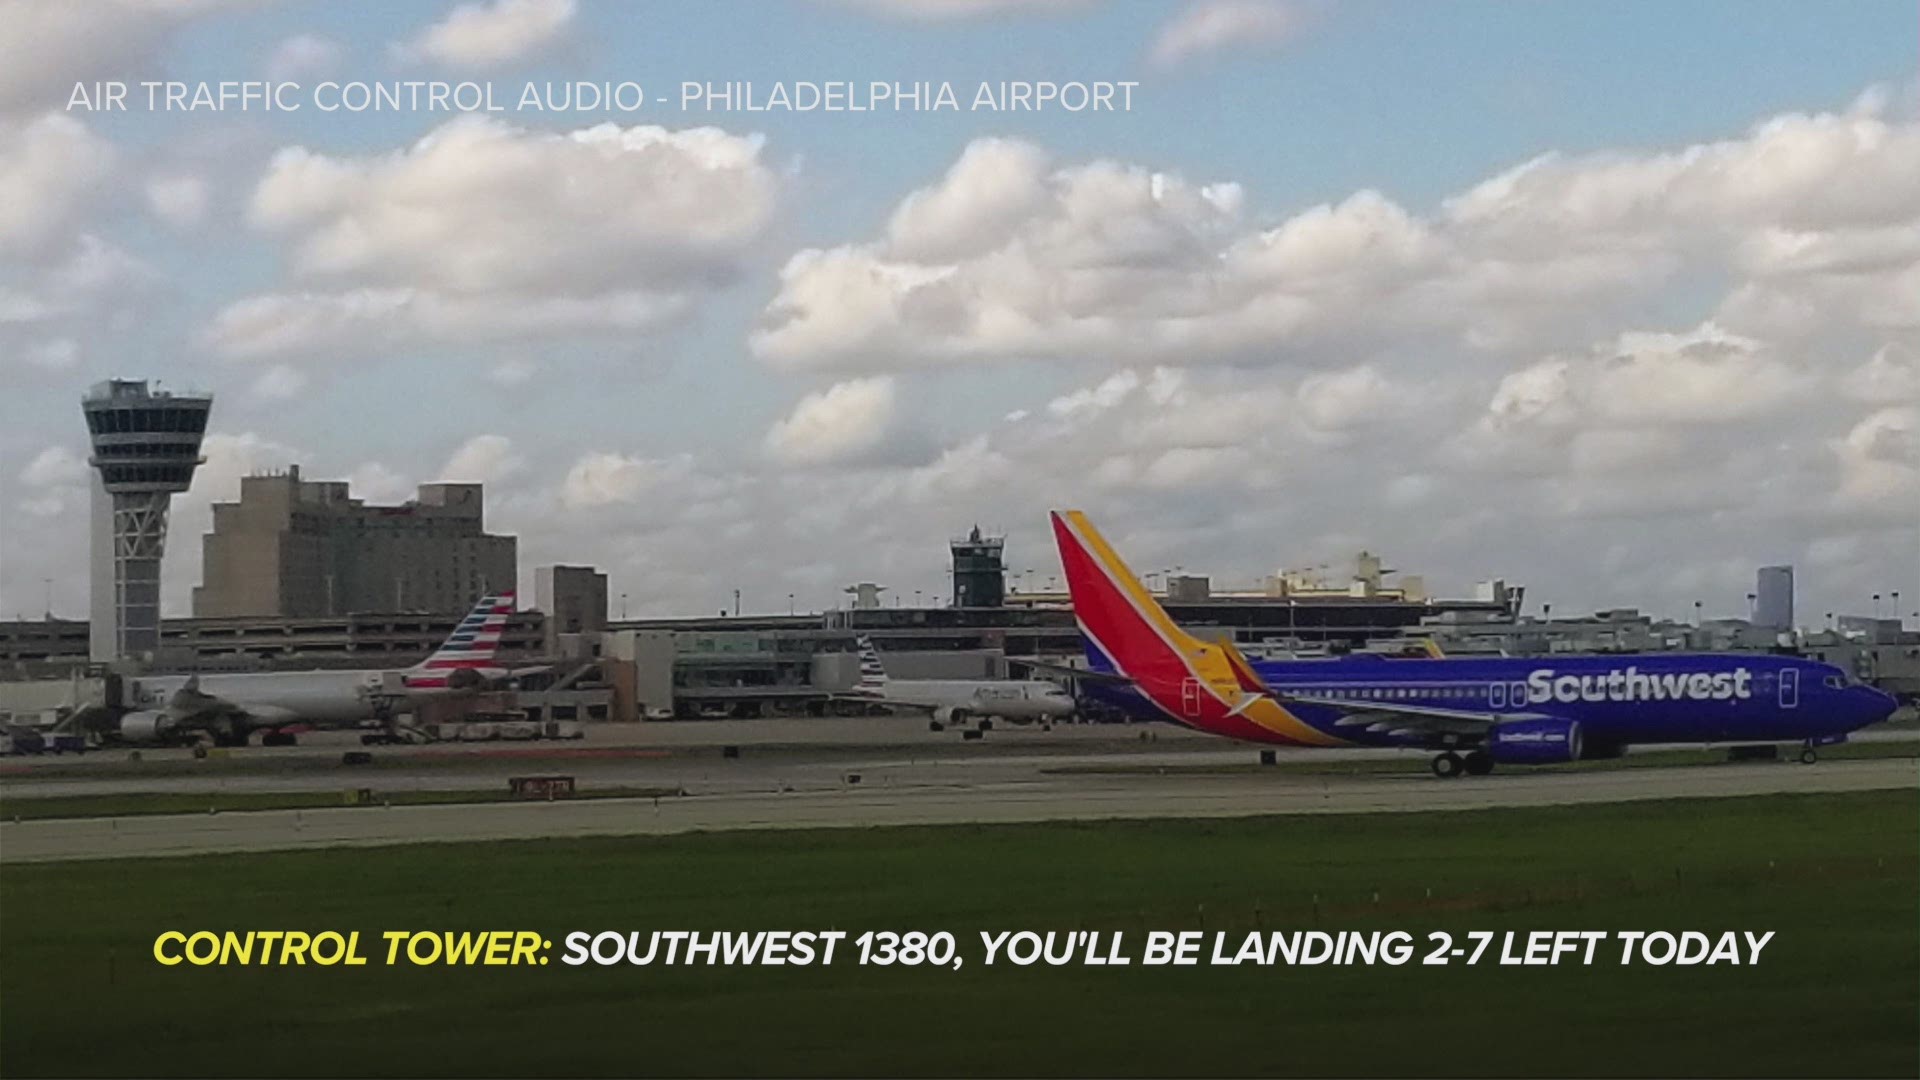 Hear air traffic controllers and the pilot of a Dallas-bound flight navigate a catastrophic engine failure and the ensuing emergency landing in Philadelphia.